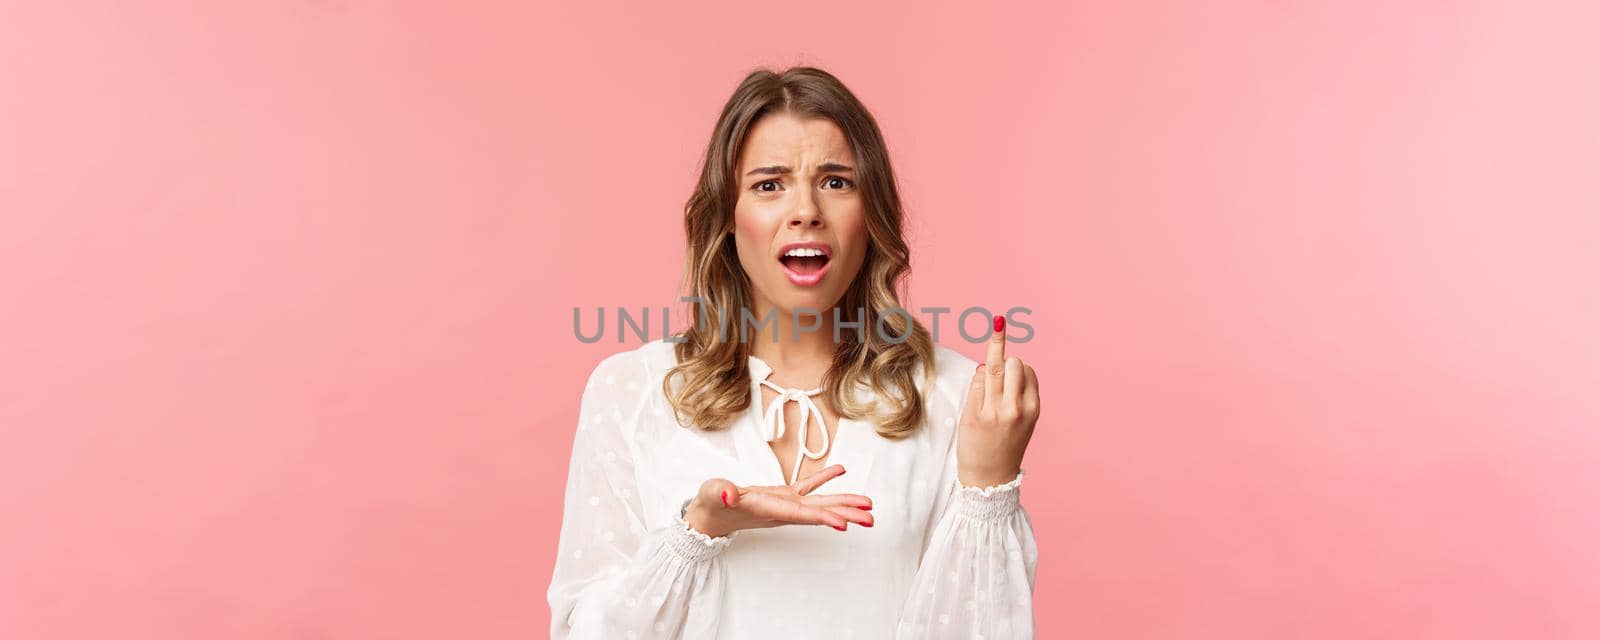 Close-up portrait of frustrated pissed-off, complaining beautiful girl tired of waiting for proposal, pointing at ring finger with bothered grimace, standing pink background disappointed.